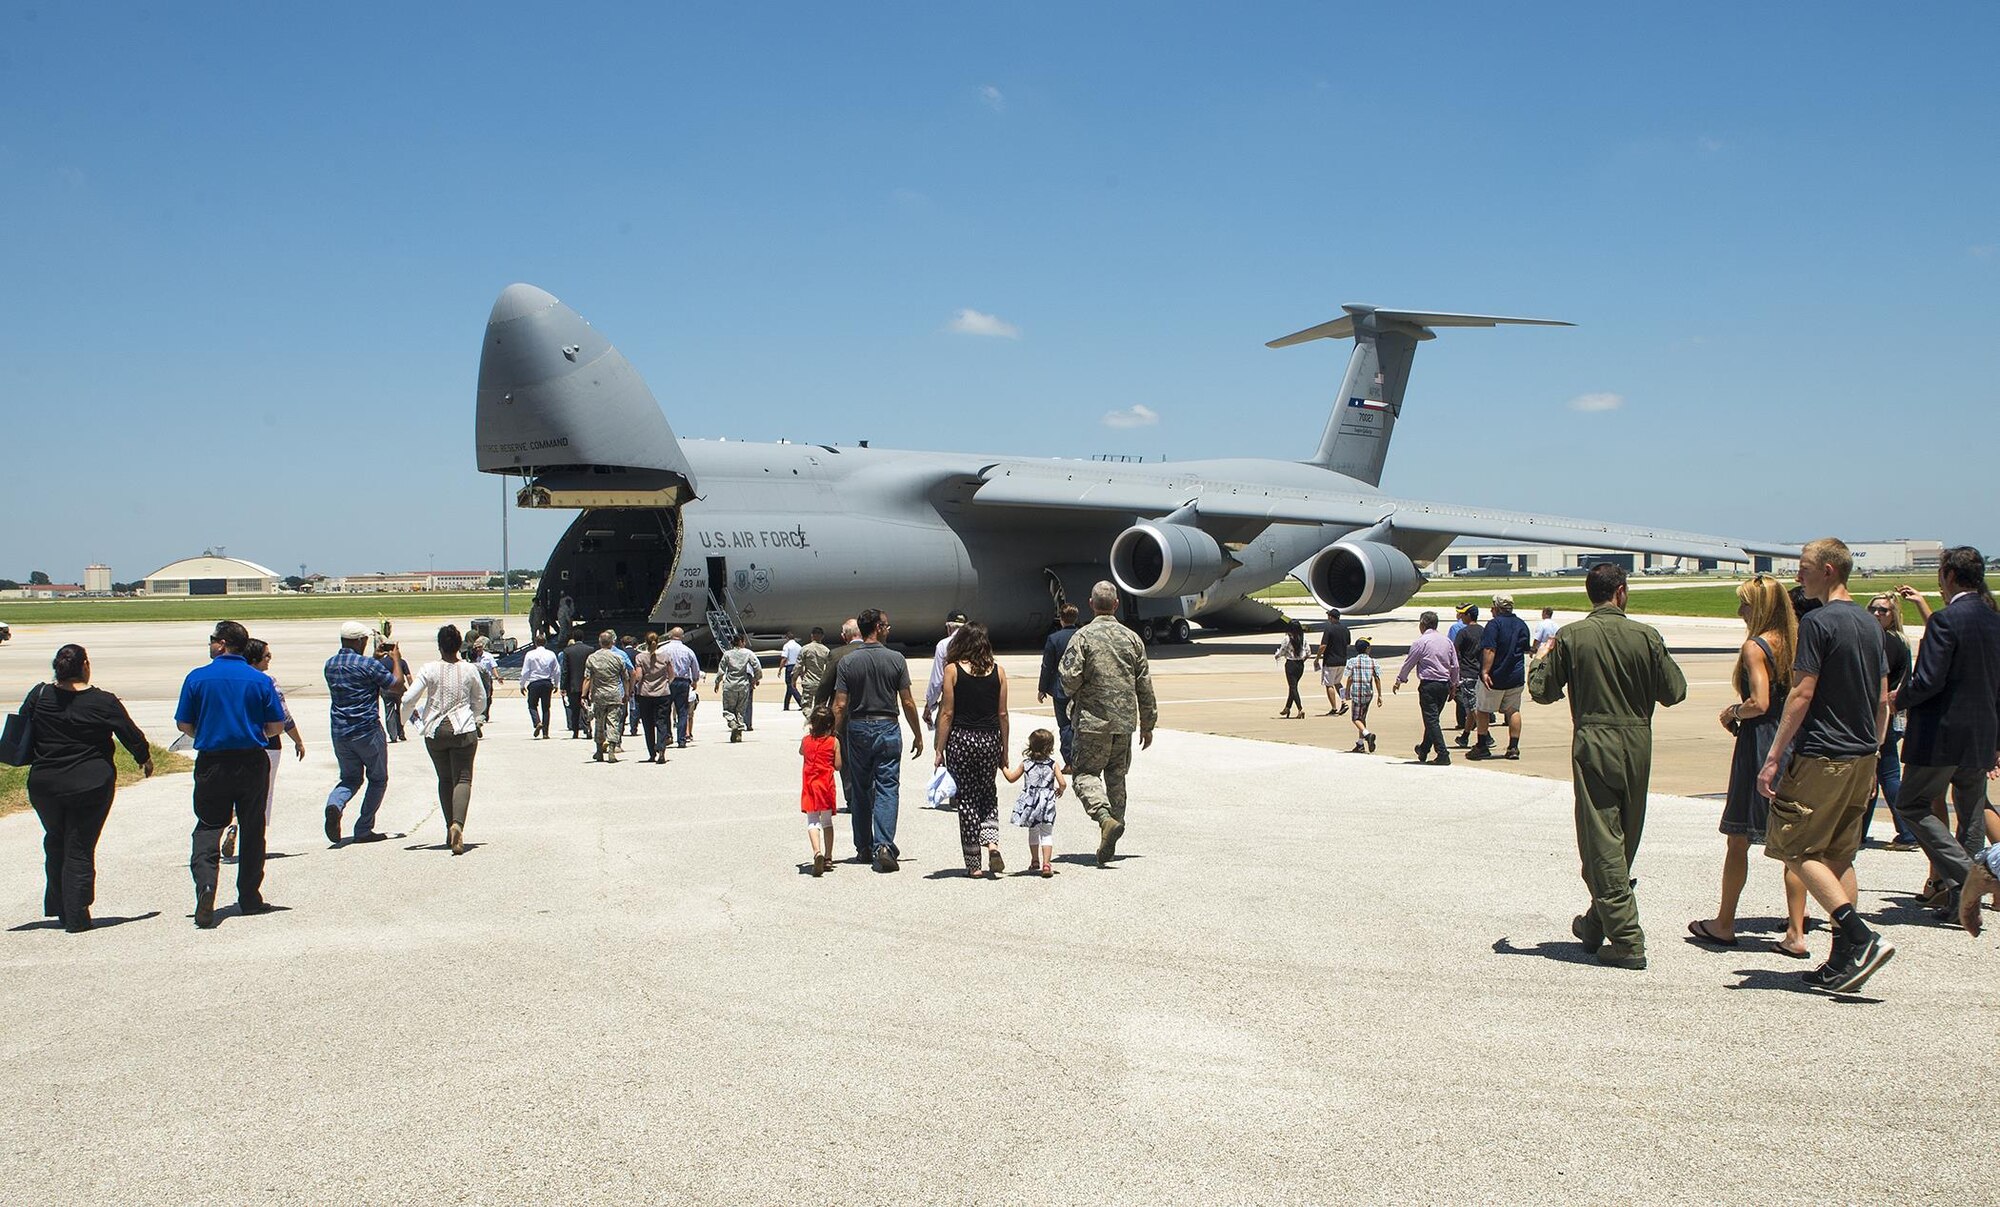 Family members and invited guests walk onto the flight line to tour the 433rd Airlift Wing's first C-5M Super Galaxy aircraft, bestowed "The City of San Antonio," June 17, 2016 after the transfer ceremony at Joint Base San Antonio-Lackland, Texas. The 433rd AW will receive nine C-5M models by late 2018, which is the result of a two-phase modernization effort that will improve fuel savings, climb rate, payload capability, and noise reduction.(U.S. Air Force photo by Benjamin Faske) 